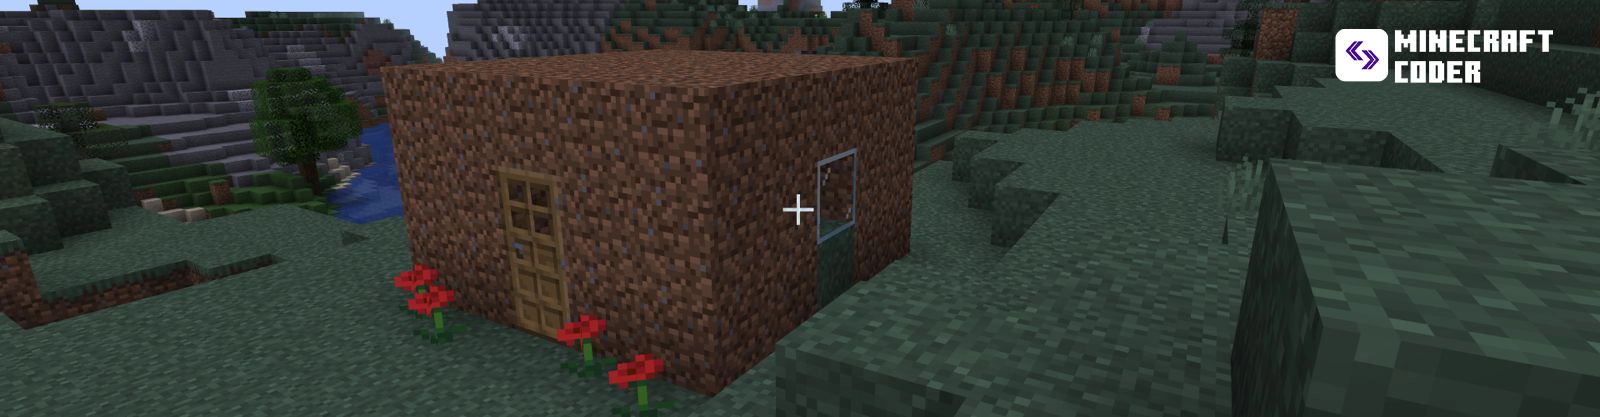 How to Make Red Dye in Minecraft